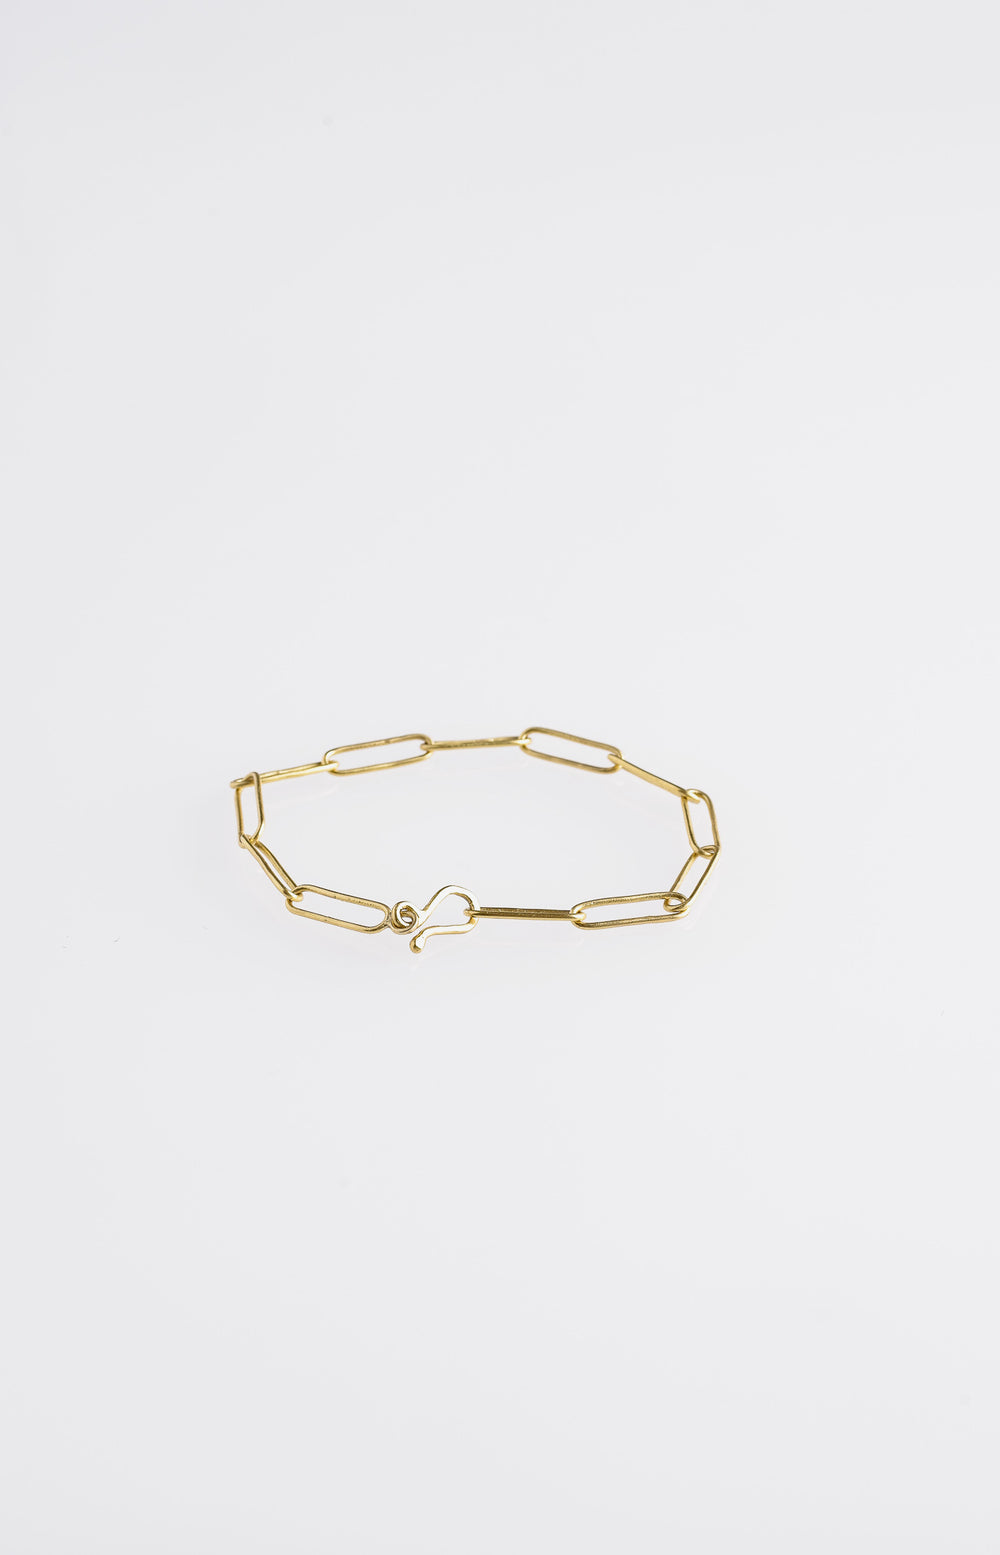 Prounis | PAPERLINK BRACELET IN GOLD – RELIQUARY